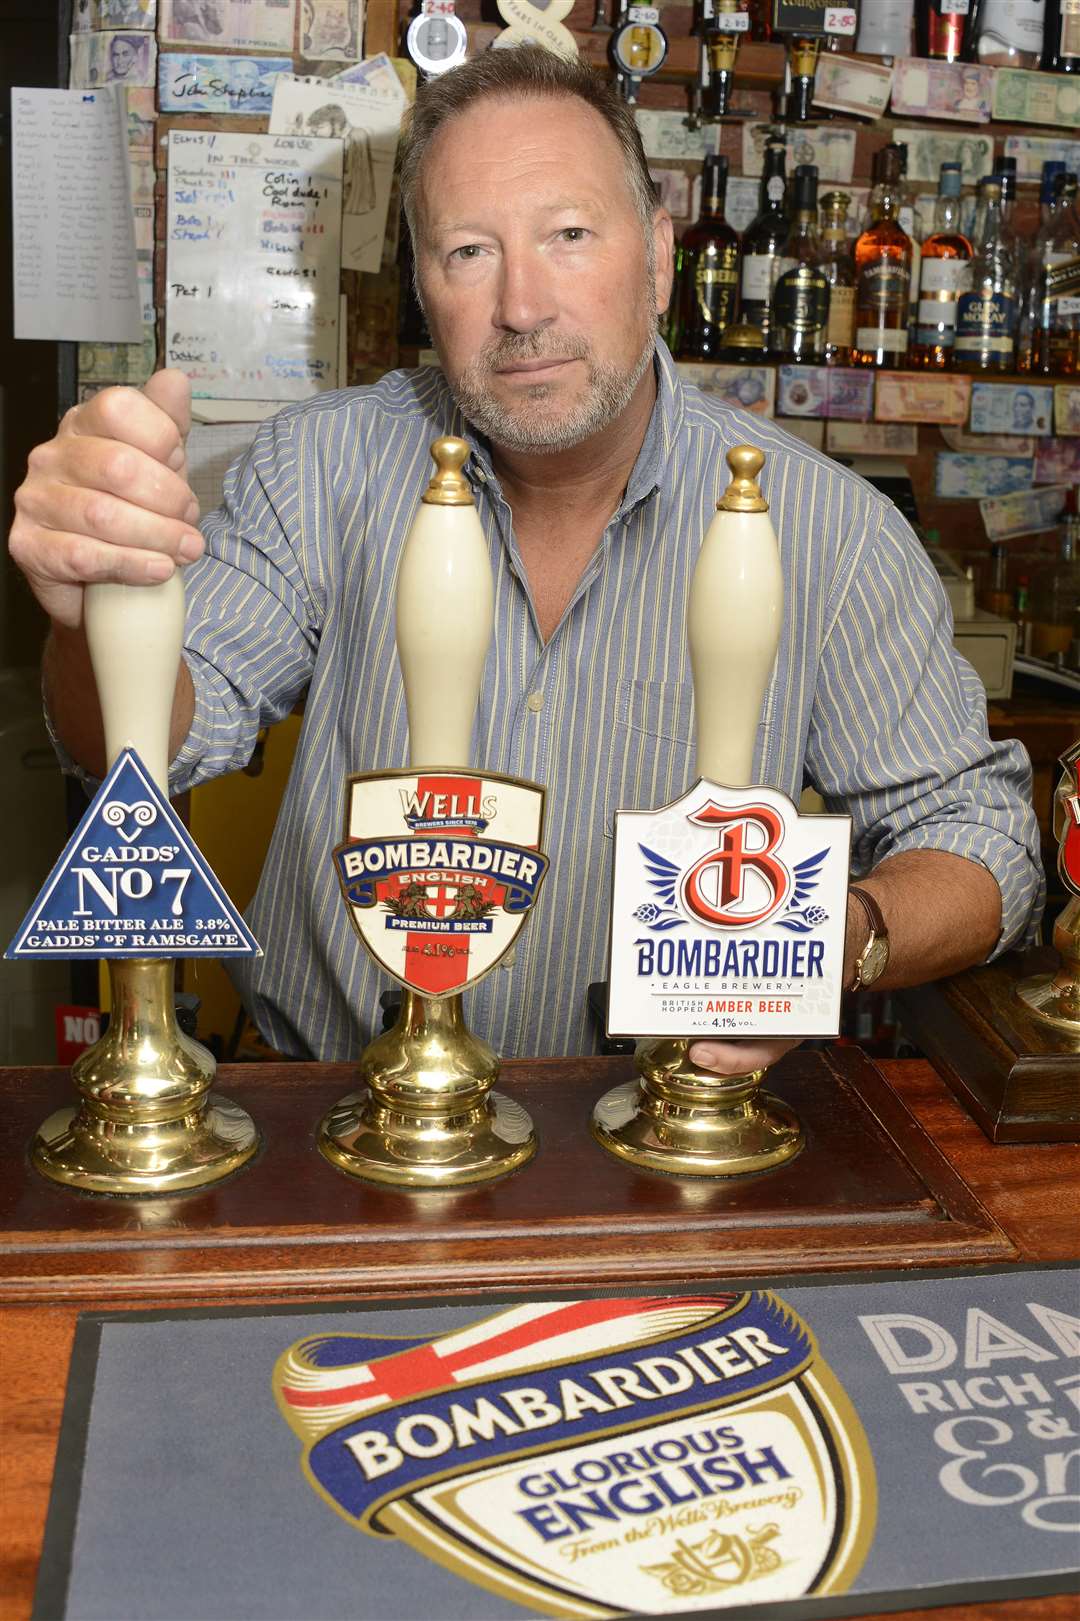 Landlord Kevin Costello is angry that the new branding for Bombardier beer has changed from English beer to British beer. Picture: Paul Amos